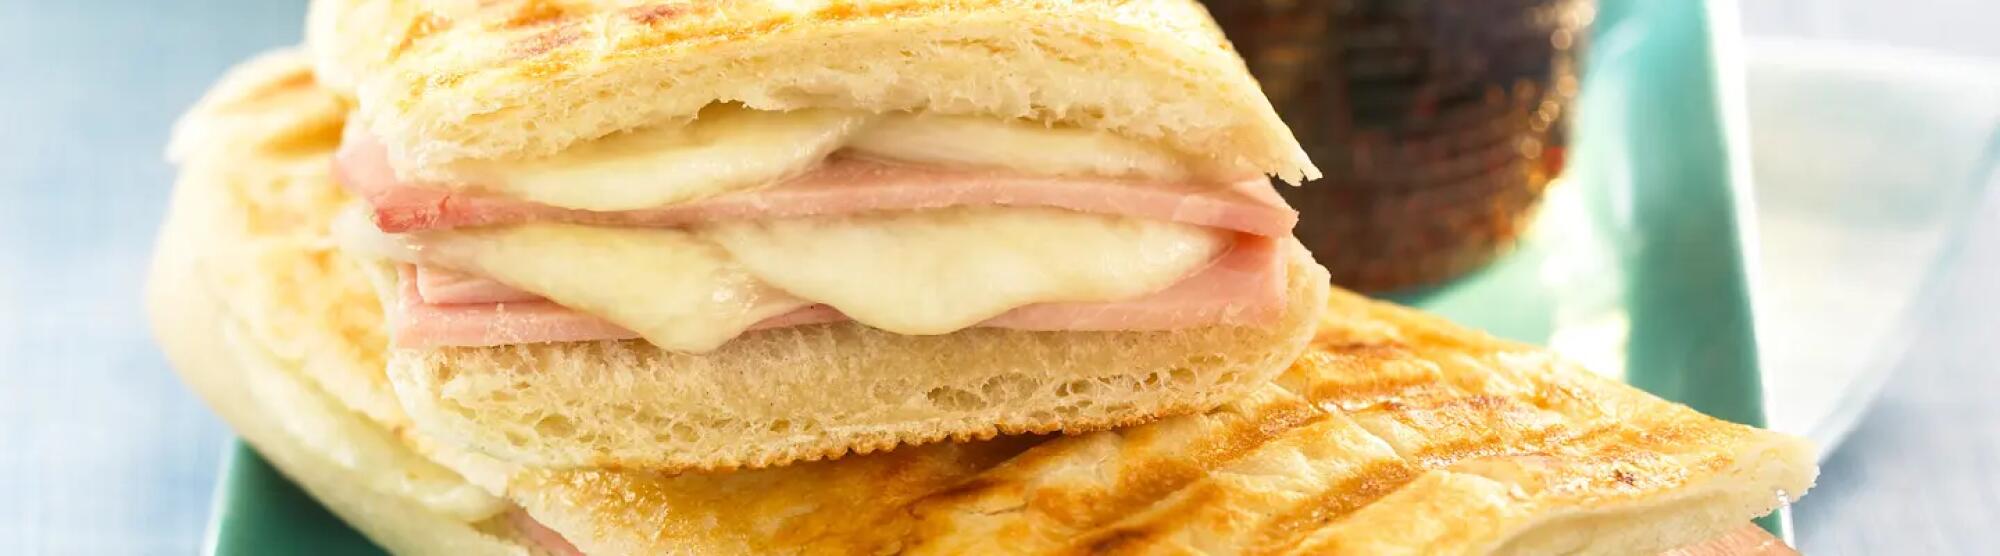 Recette : Panini au fromage